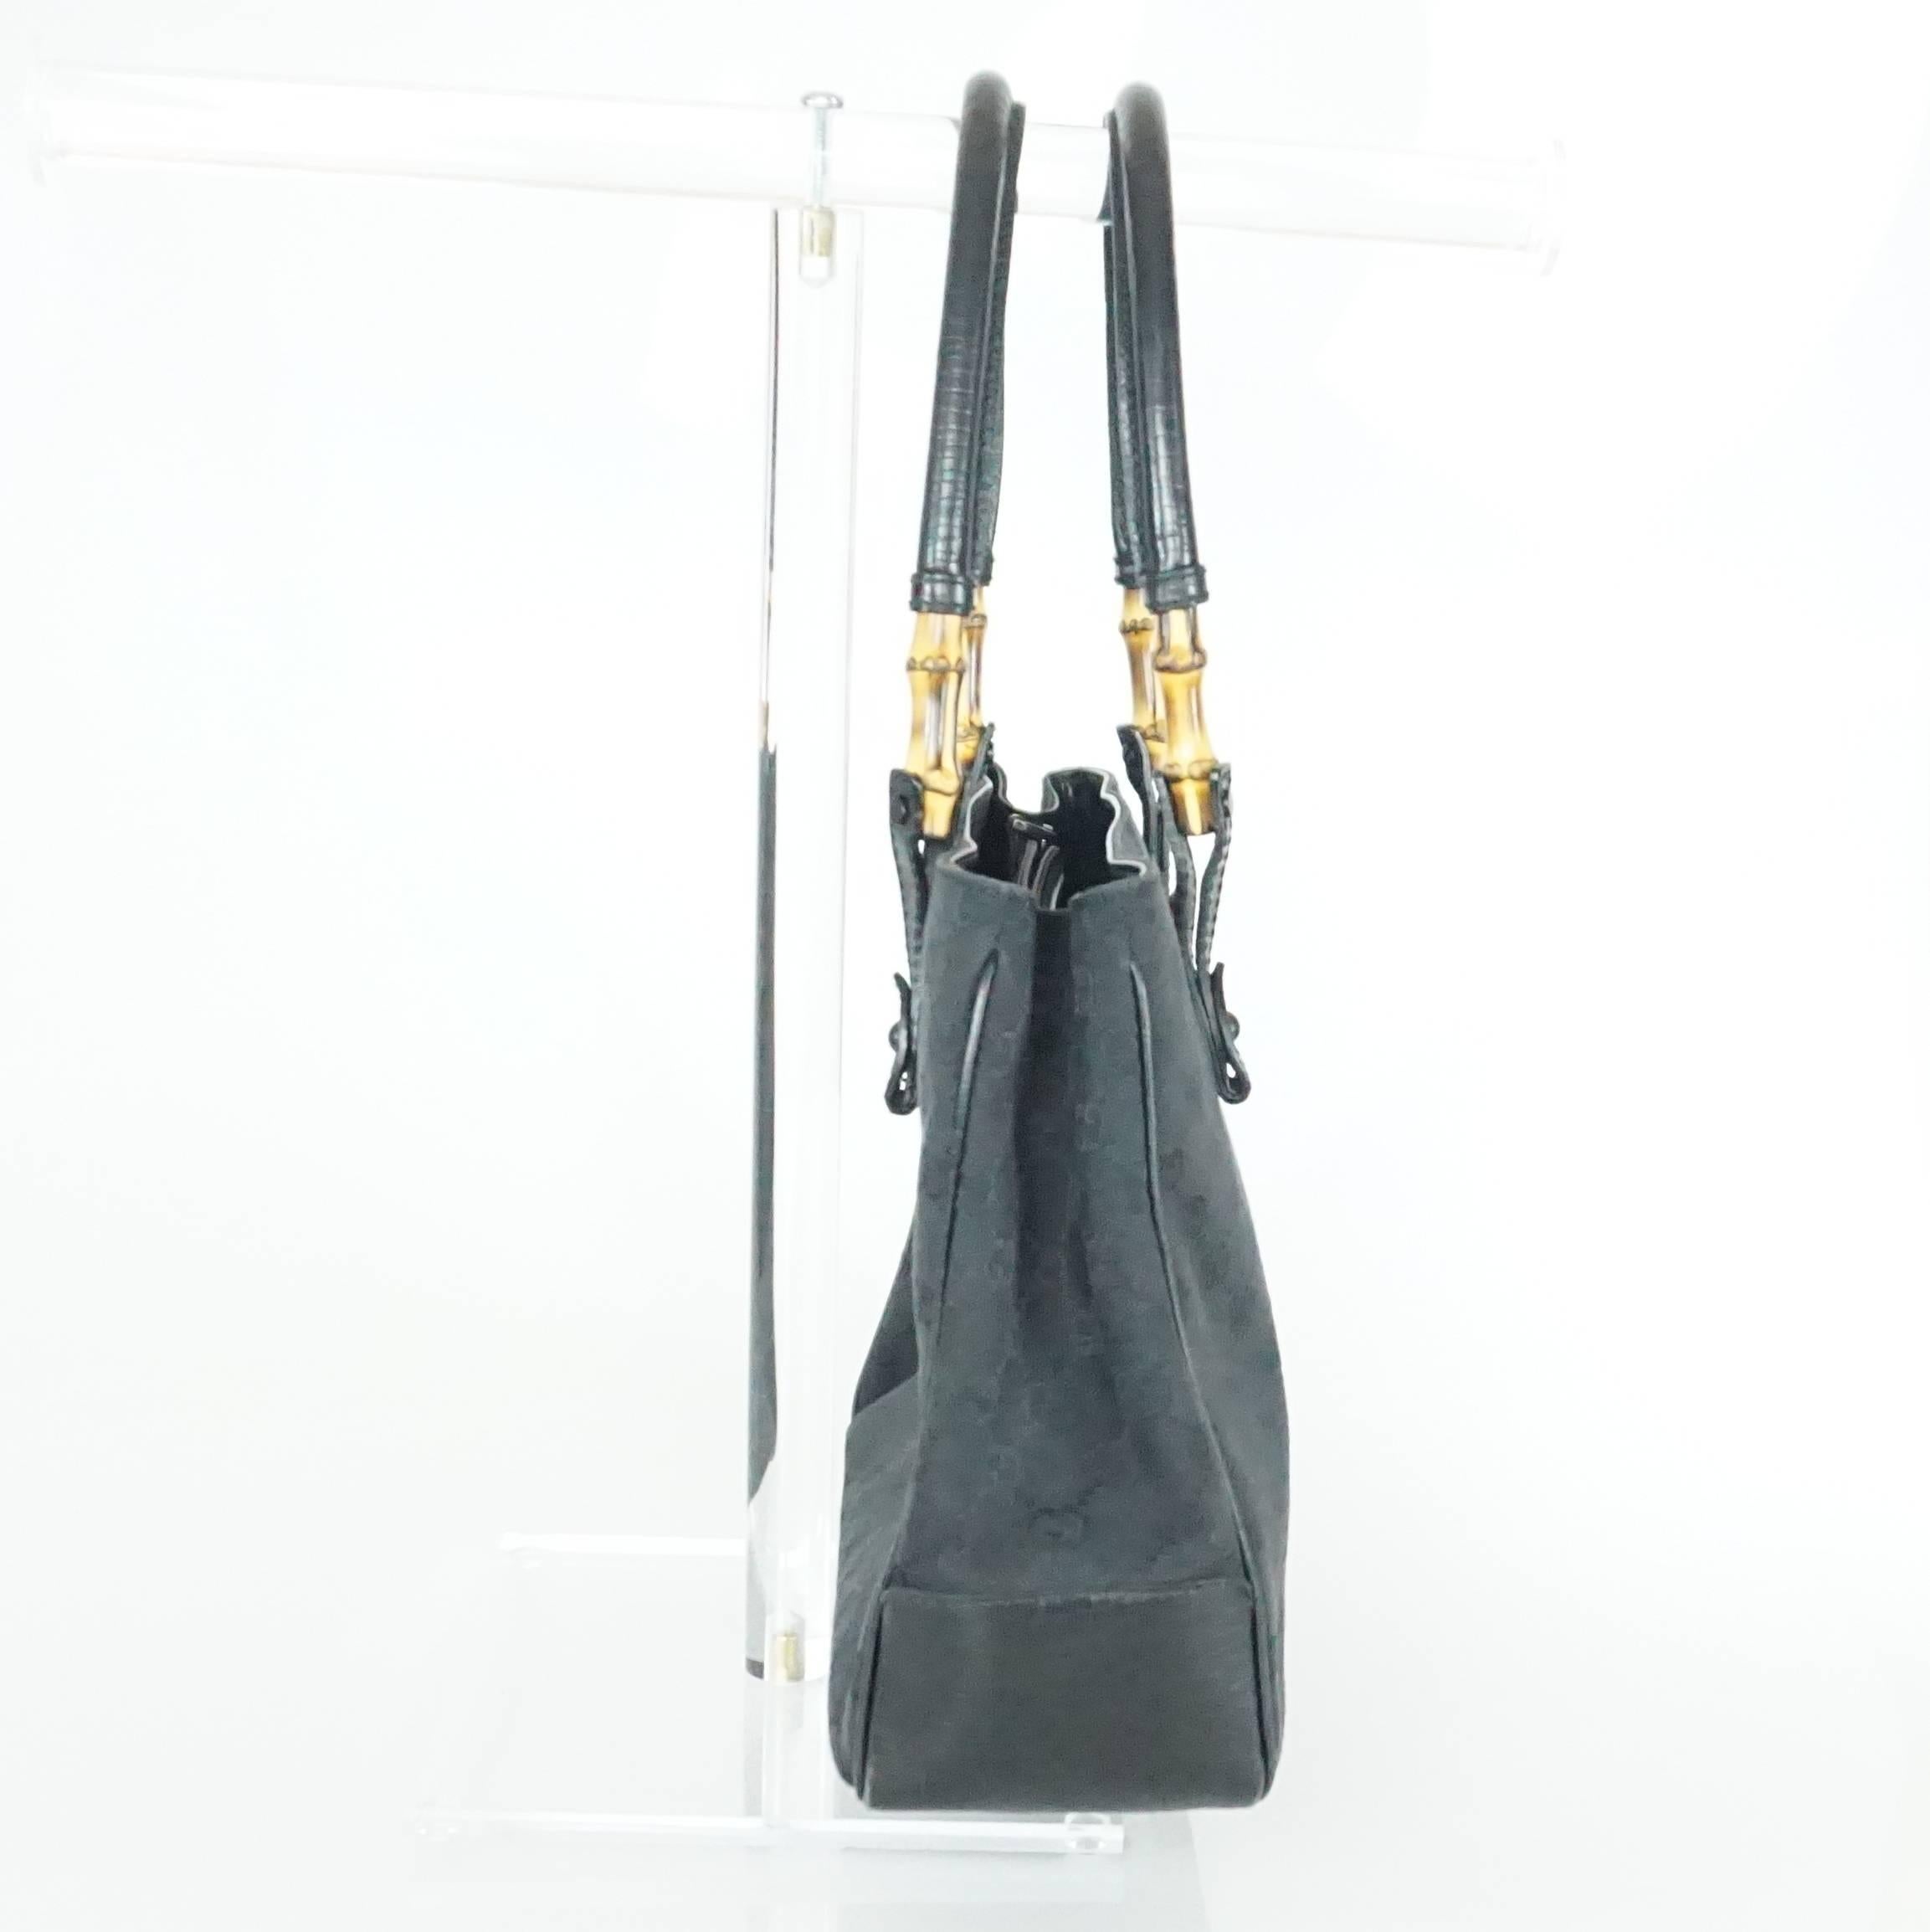 This beautiful Gucci black monogram shoulder bag has small bamboo detailing on the straps. Inside, there is a zipper compartment and two open compartments. It is in excellent condition with minor wear on the bottom and a duster is